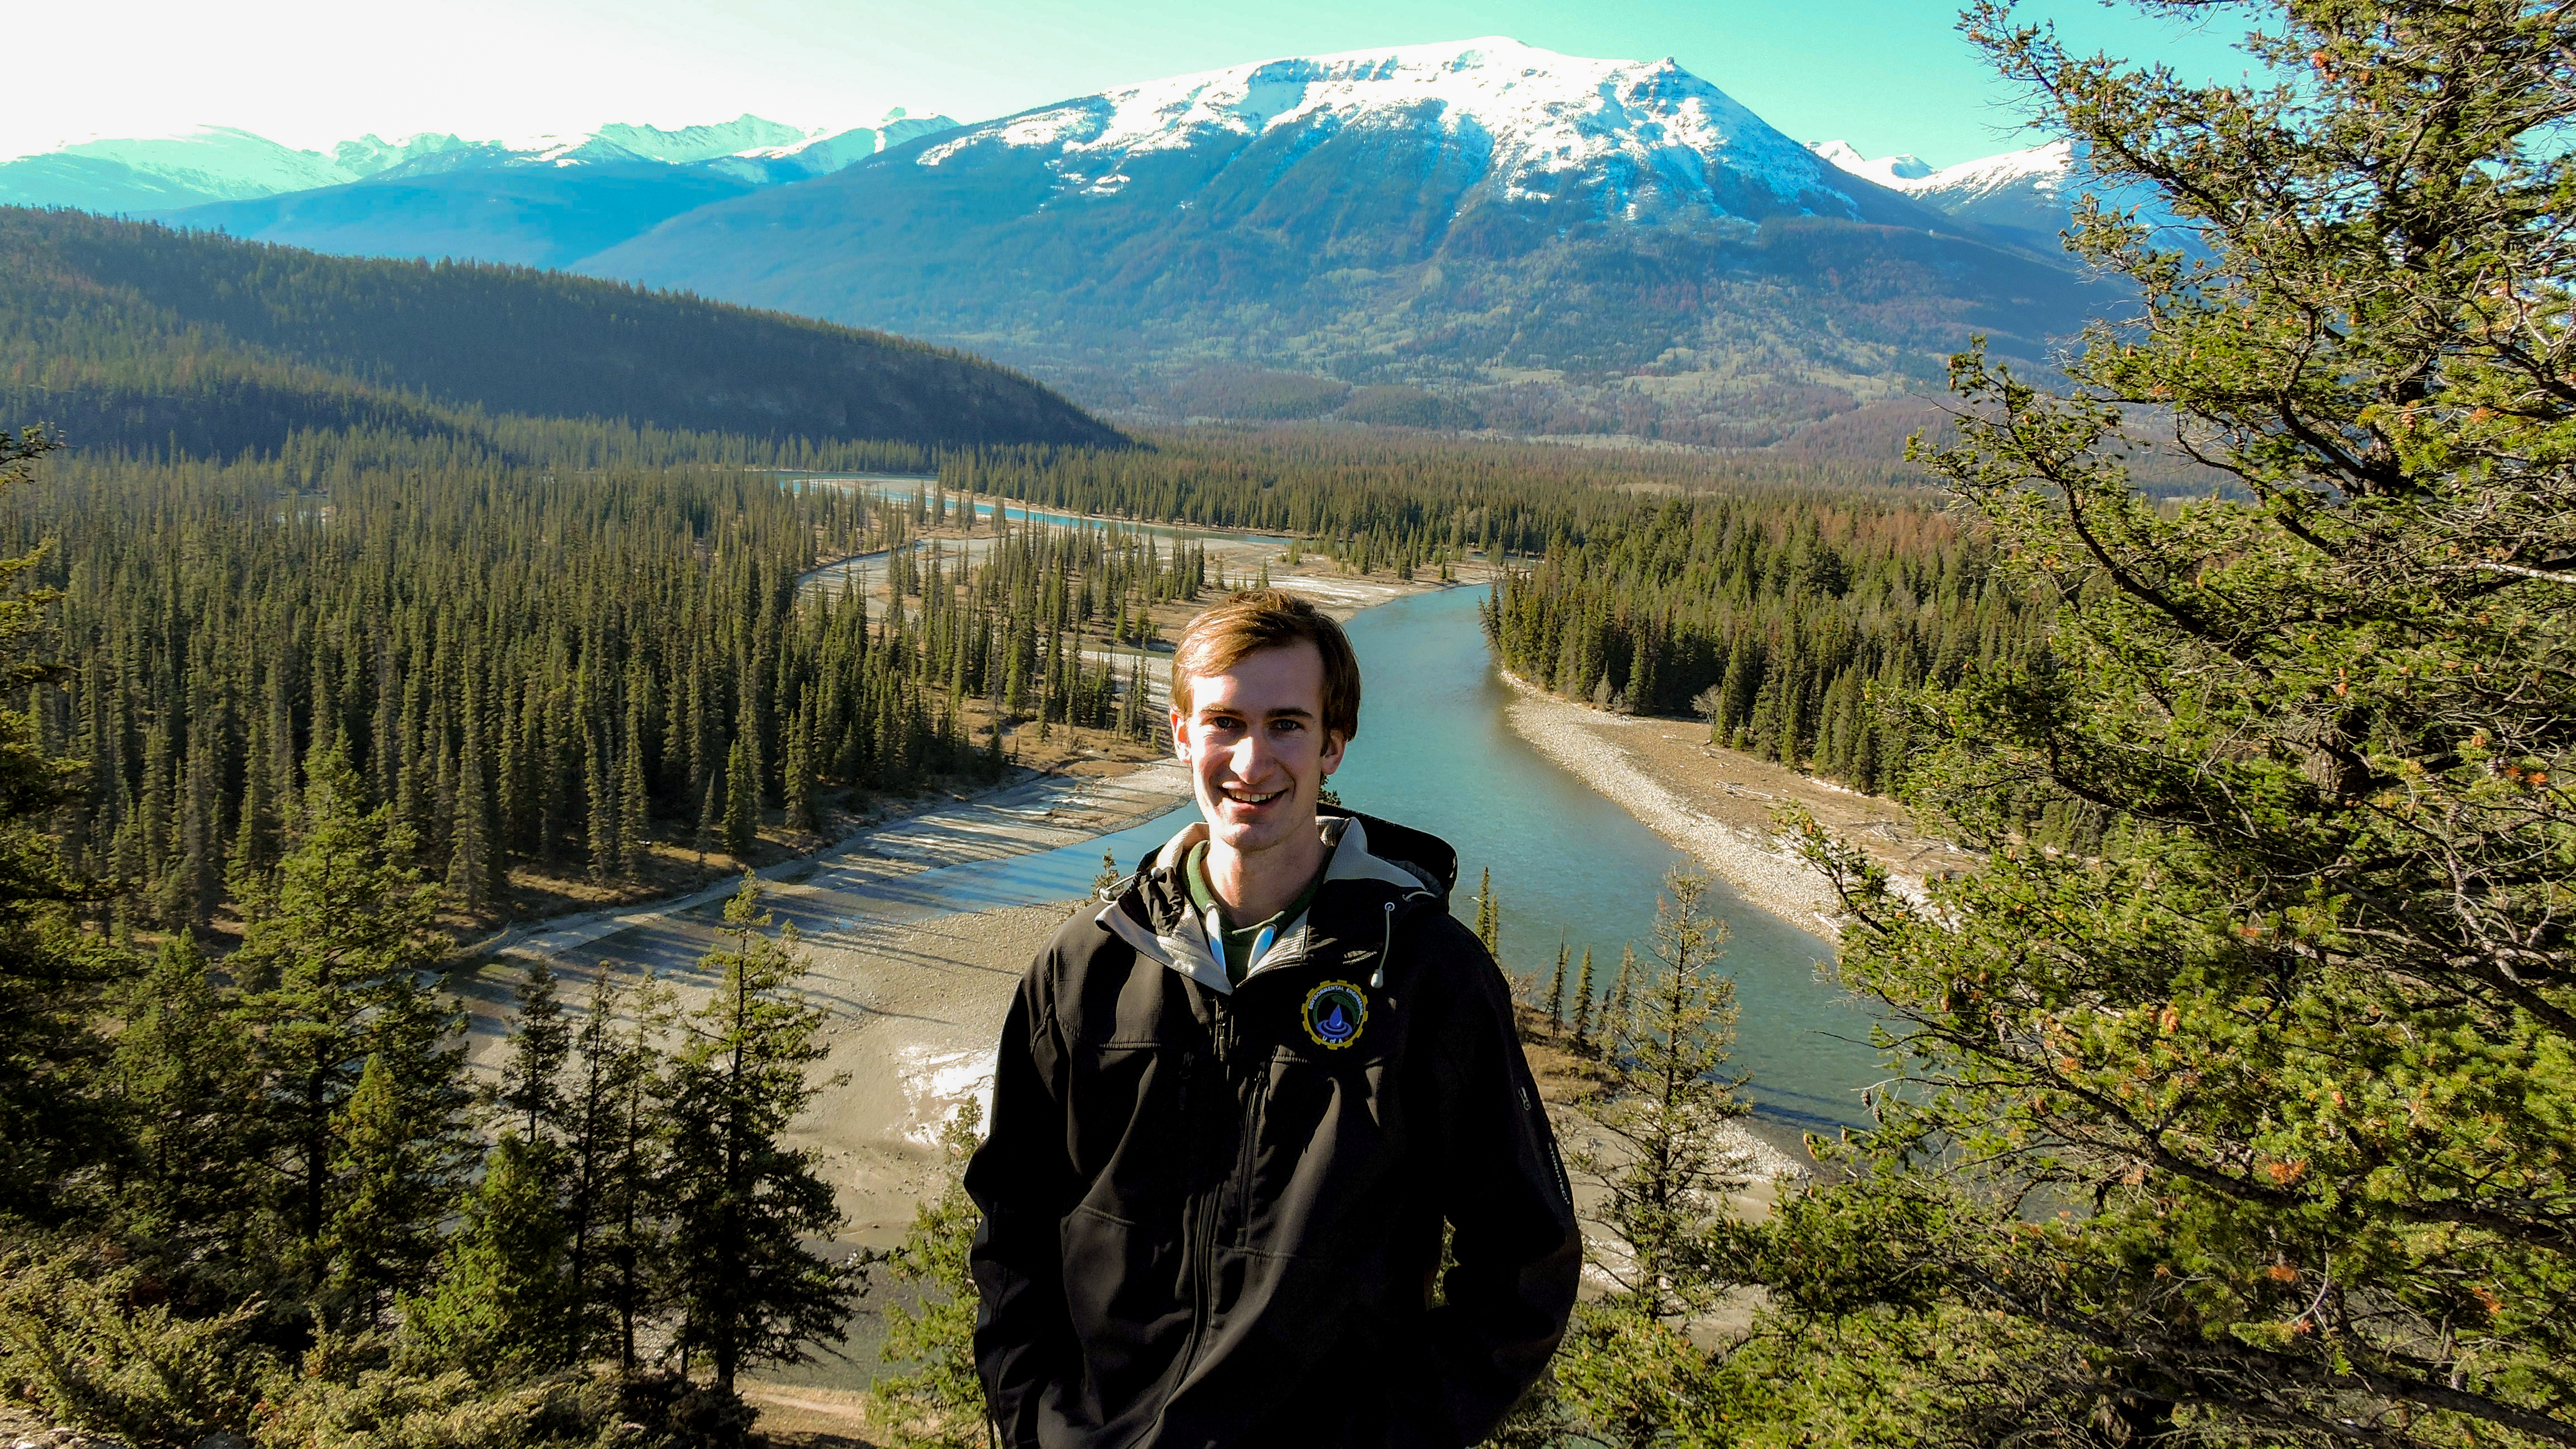 Evan stands in front of a mountain valley with trees and a stream